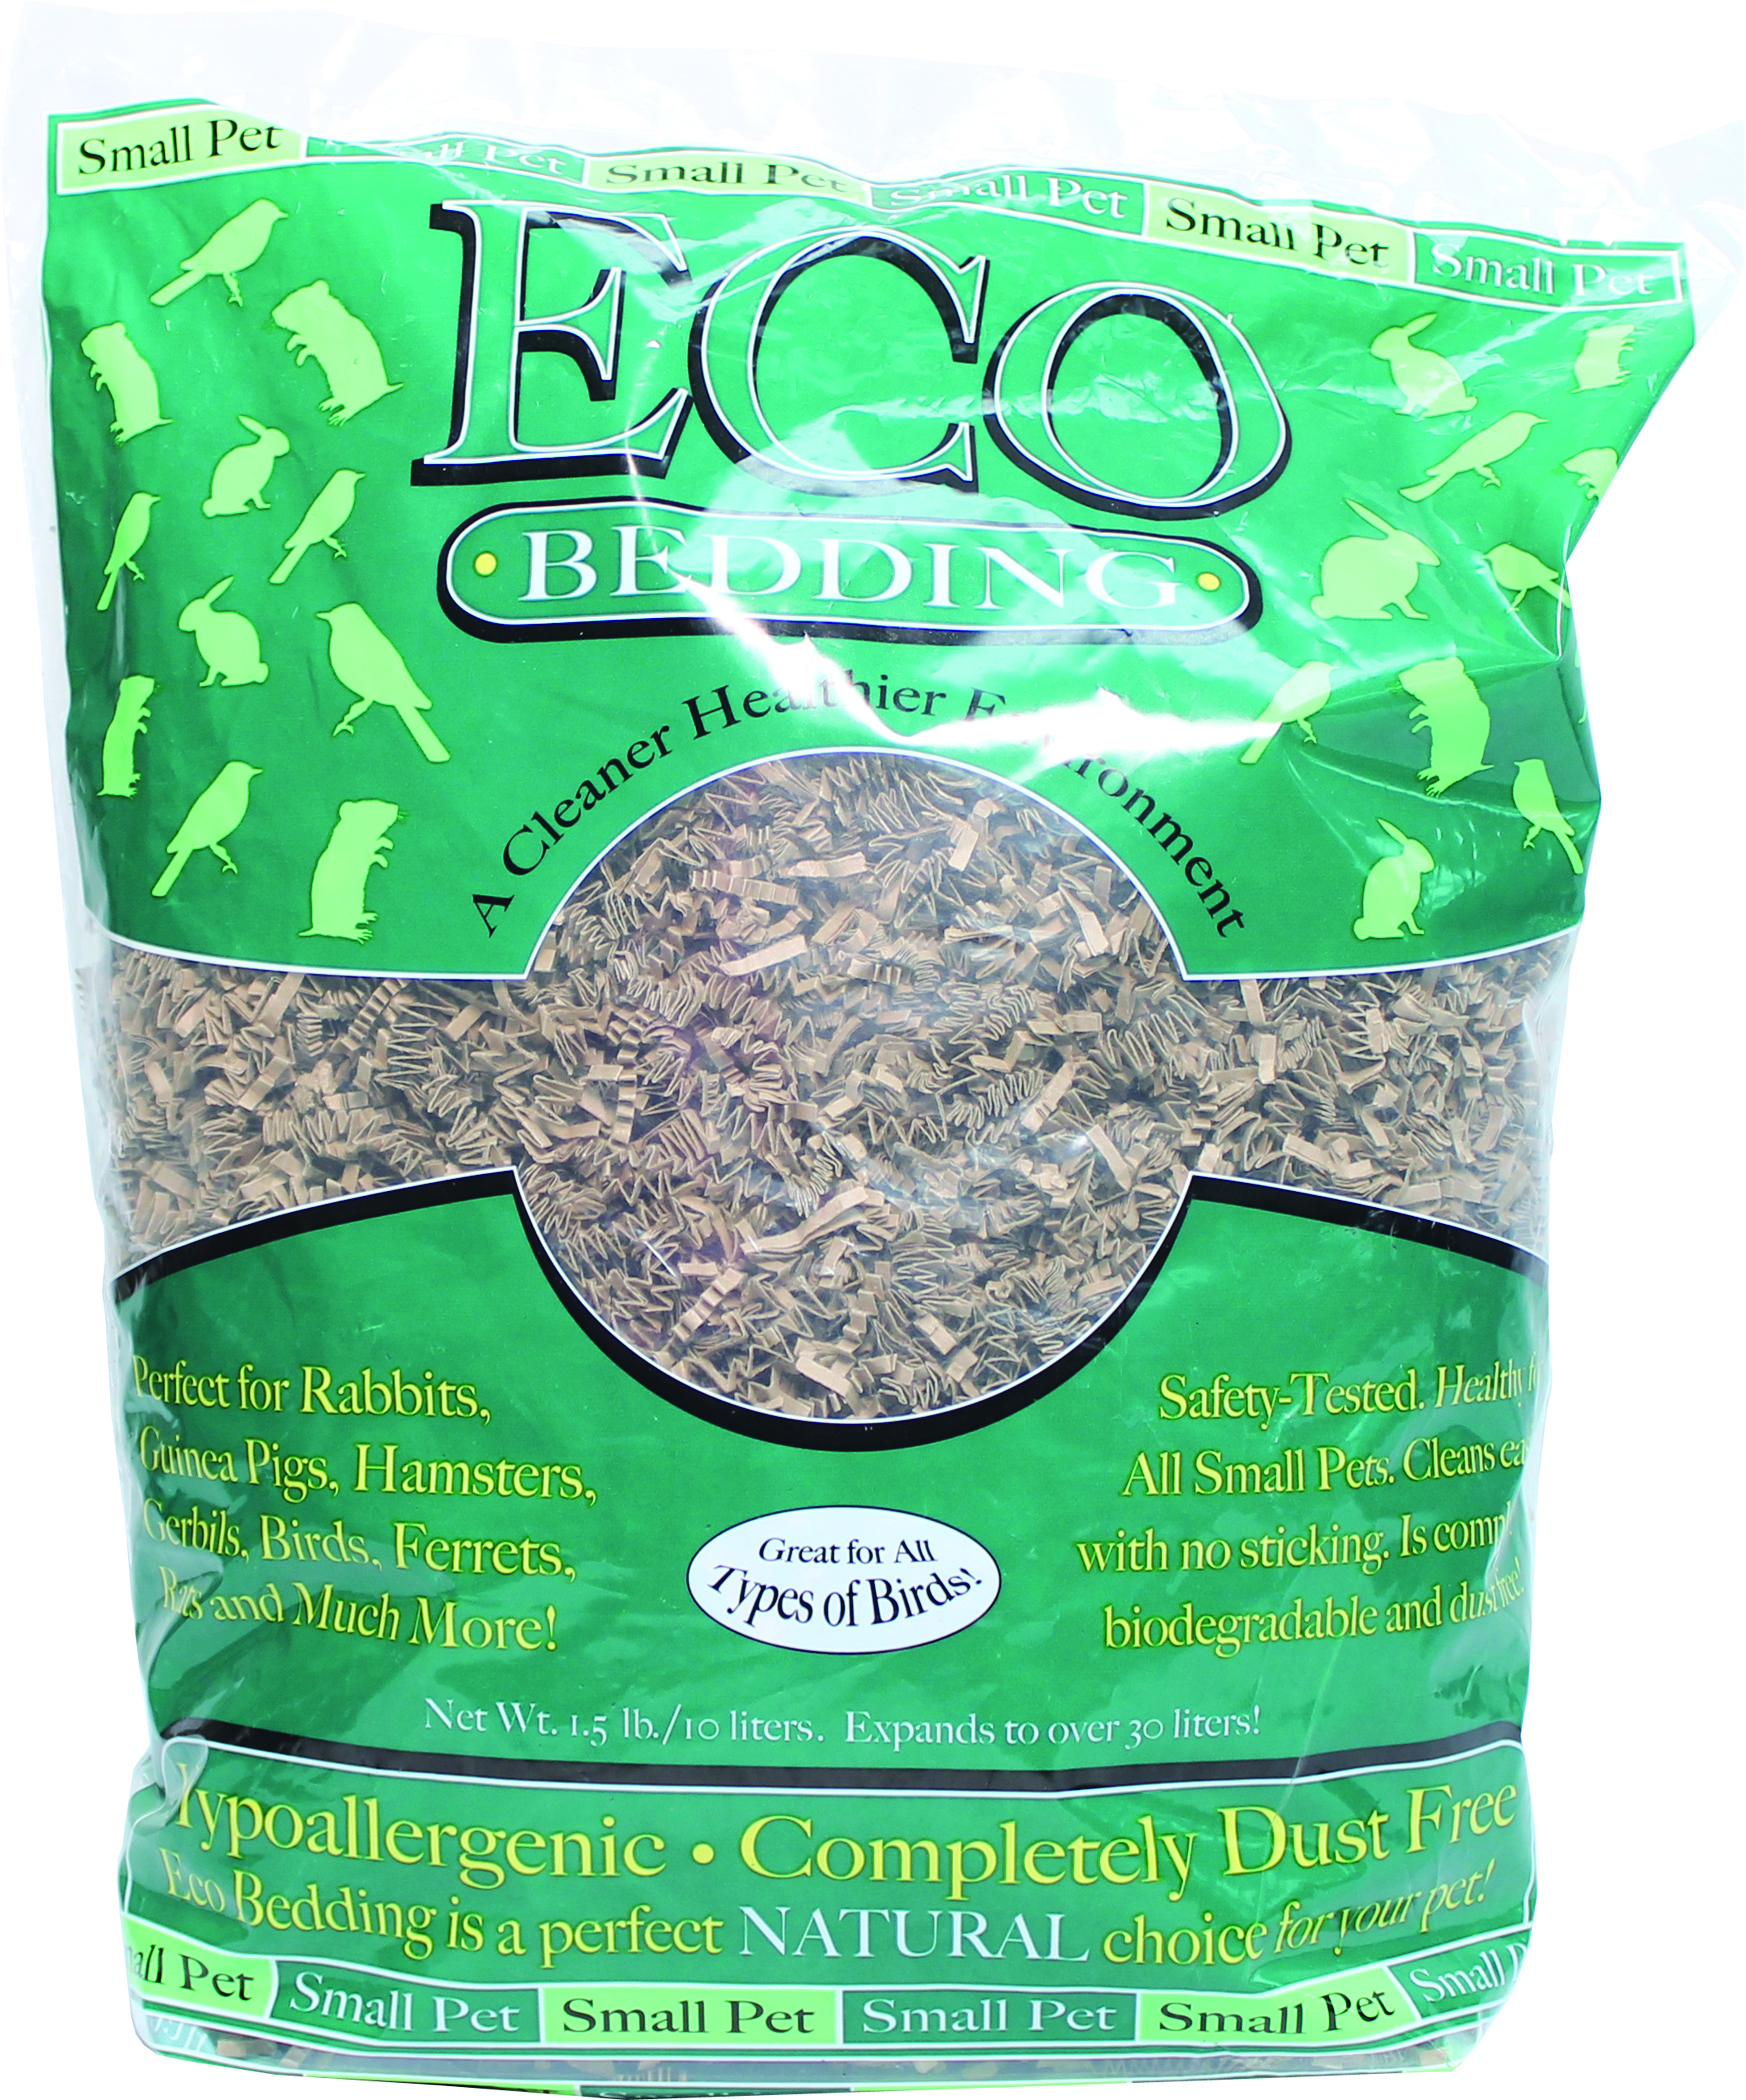 ECO BEDDING FOR SMALL PET